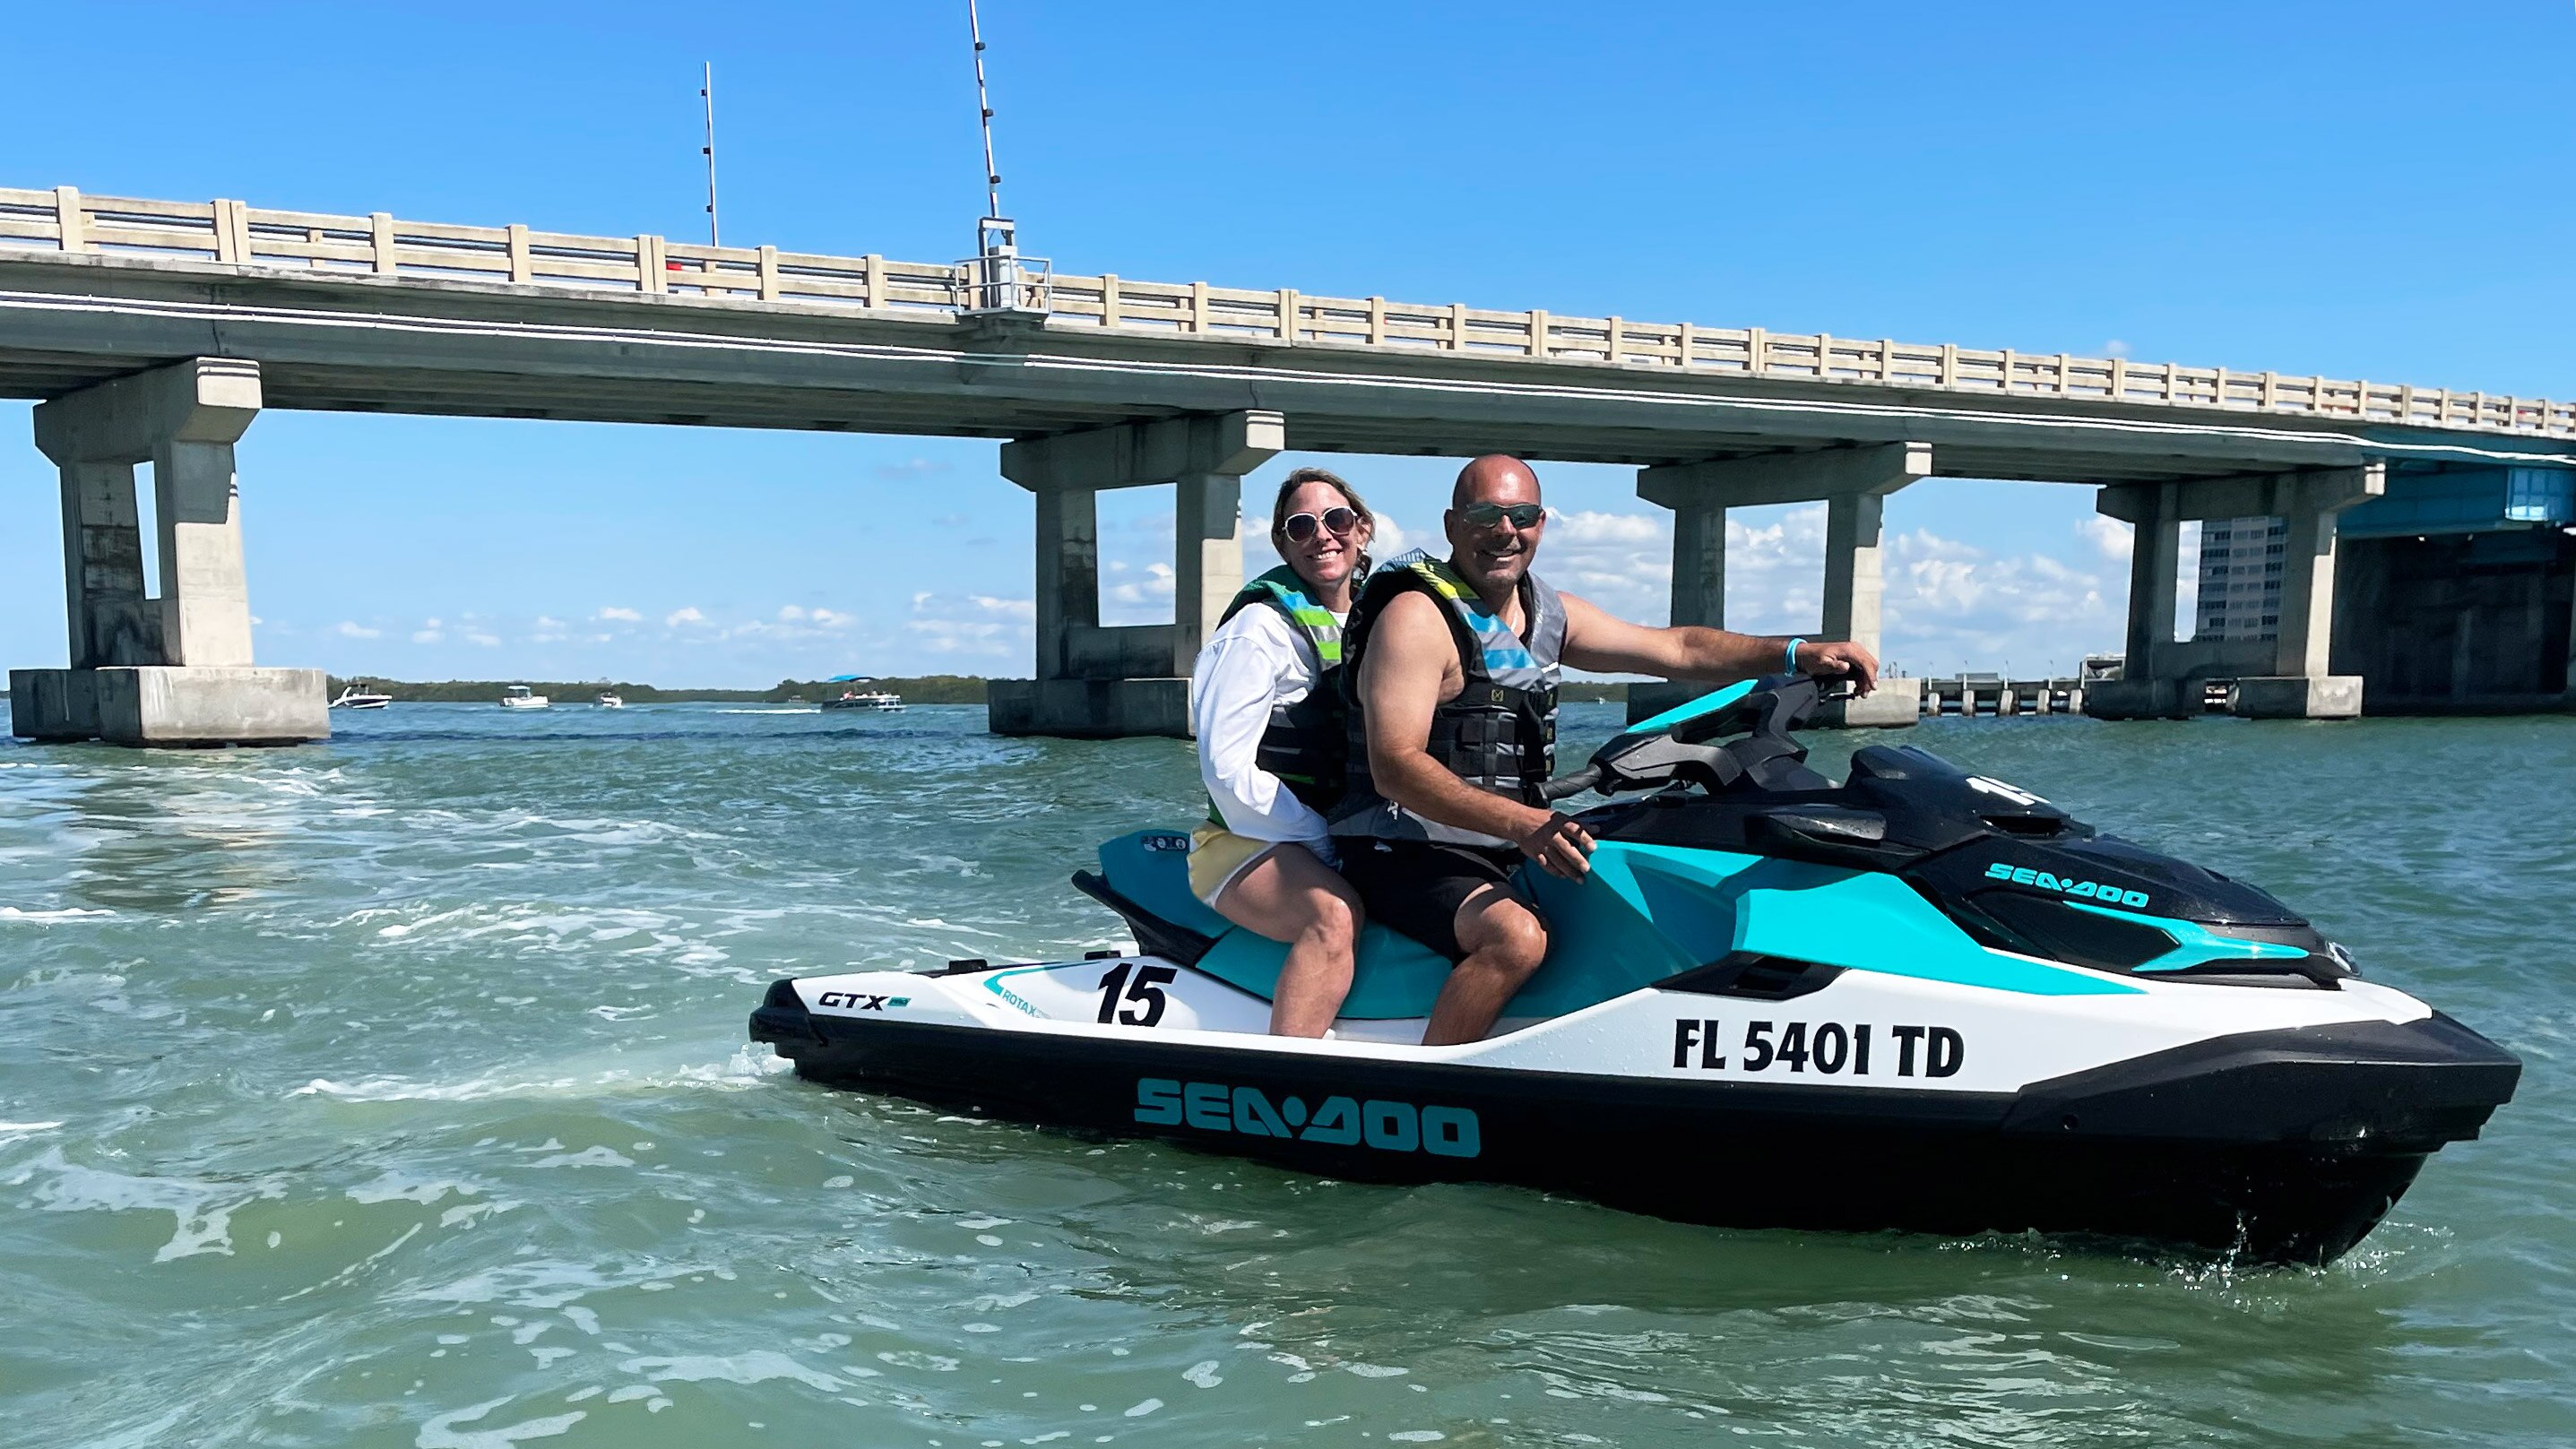 A couple on a Sea-Doo personal watercraft on the water